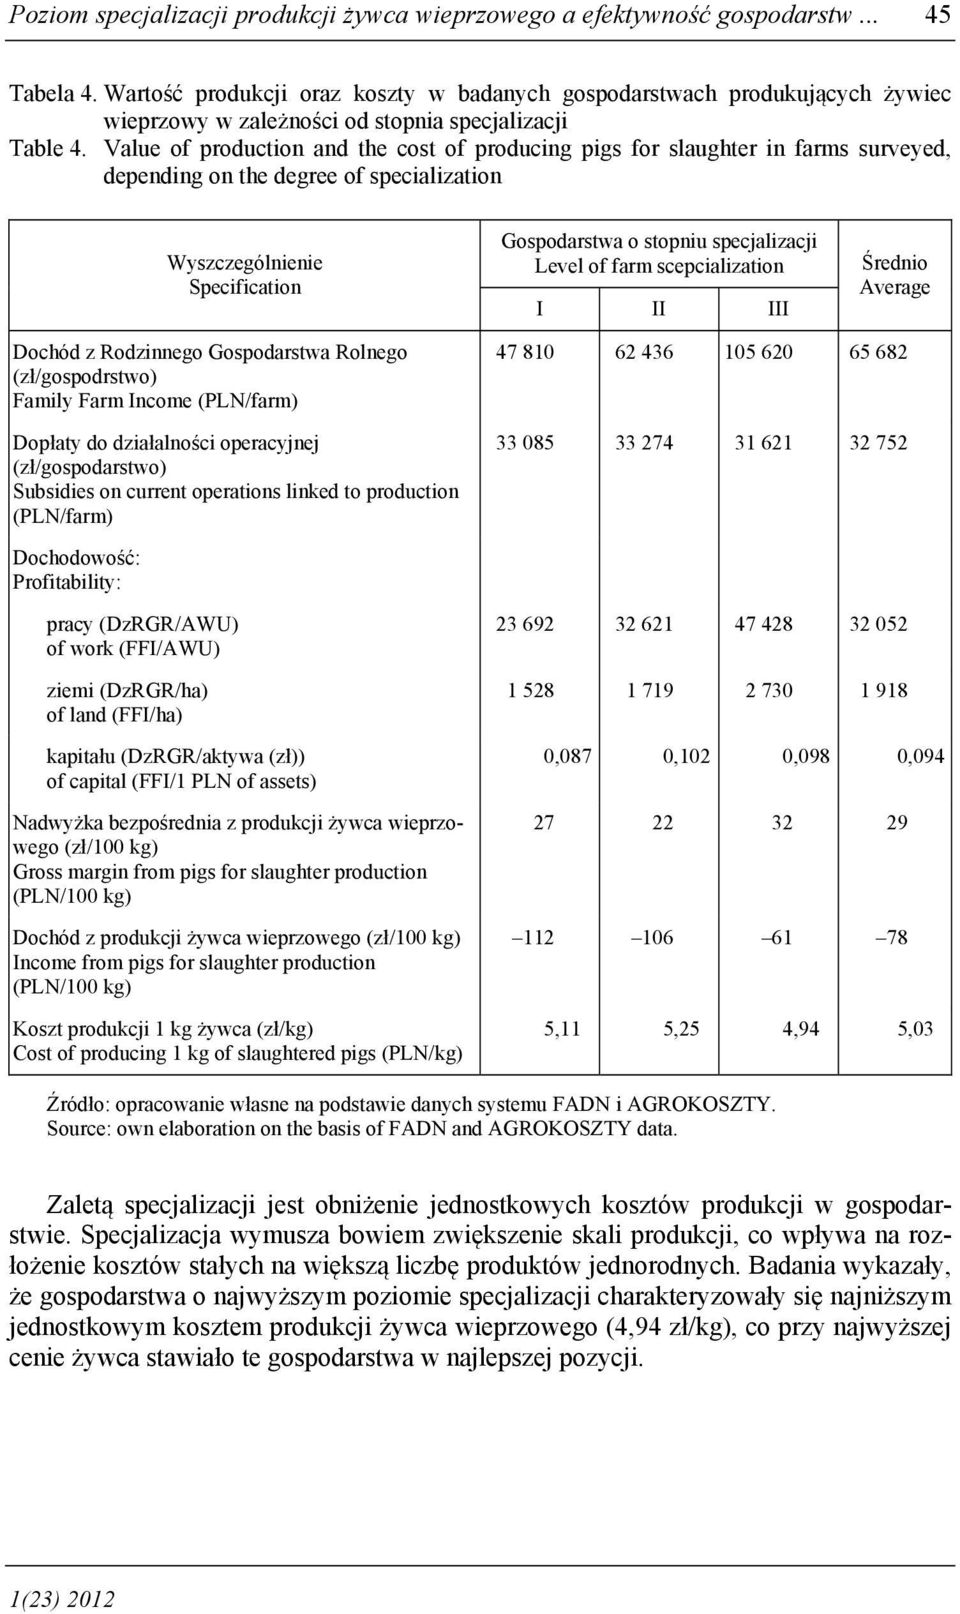 Value of production and the cost of producing pigs for slaughter in farms surveyed, depending on the degree of specialization Wyszczególnienie Specification Gospodarstwa o stopniu specjalizacji Level